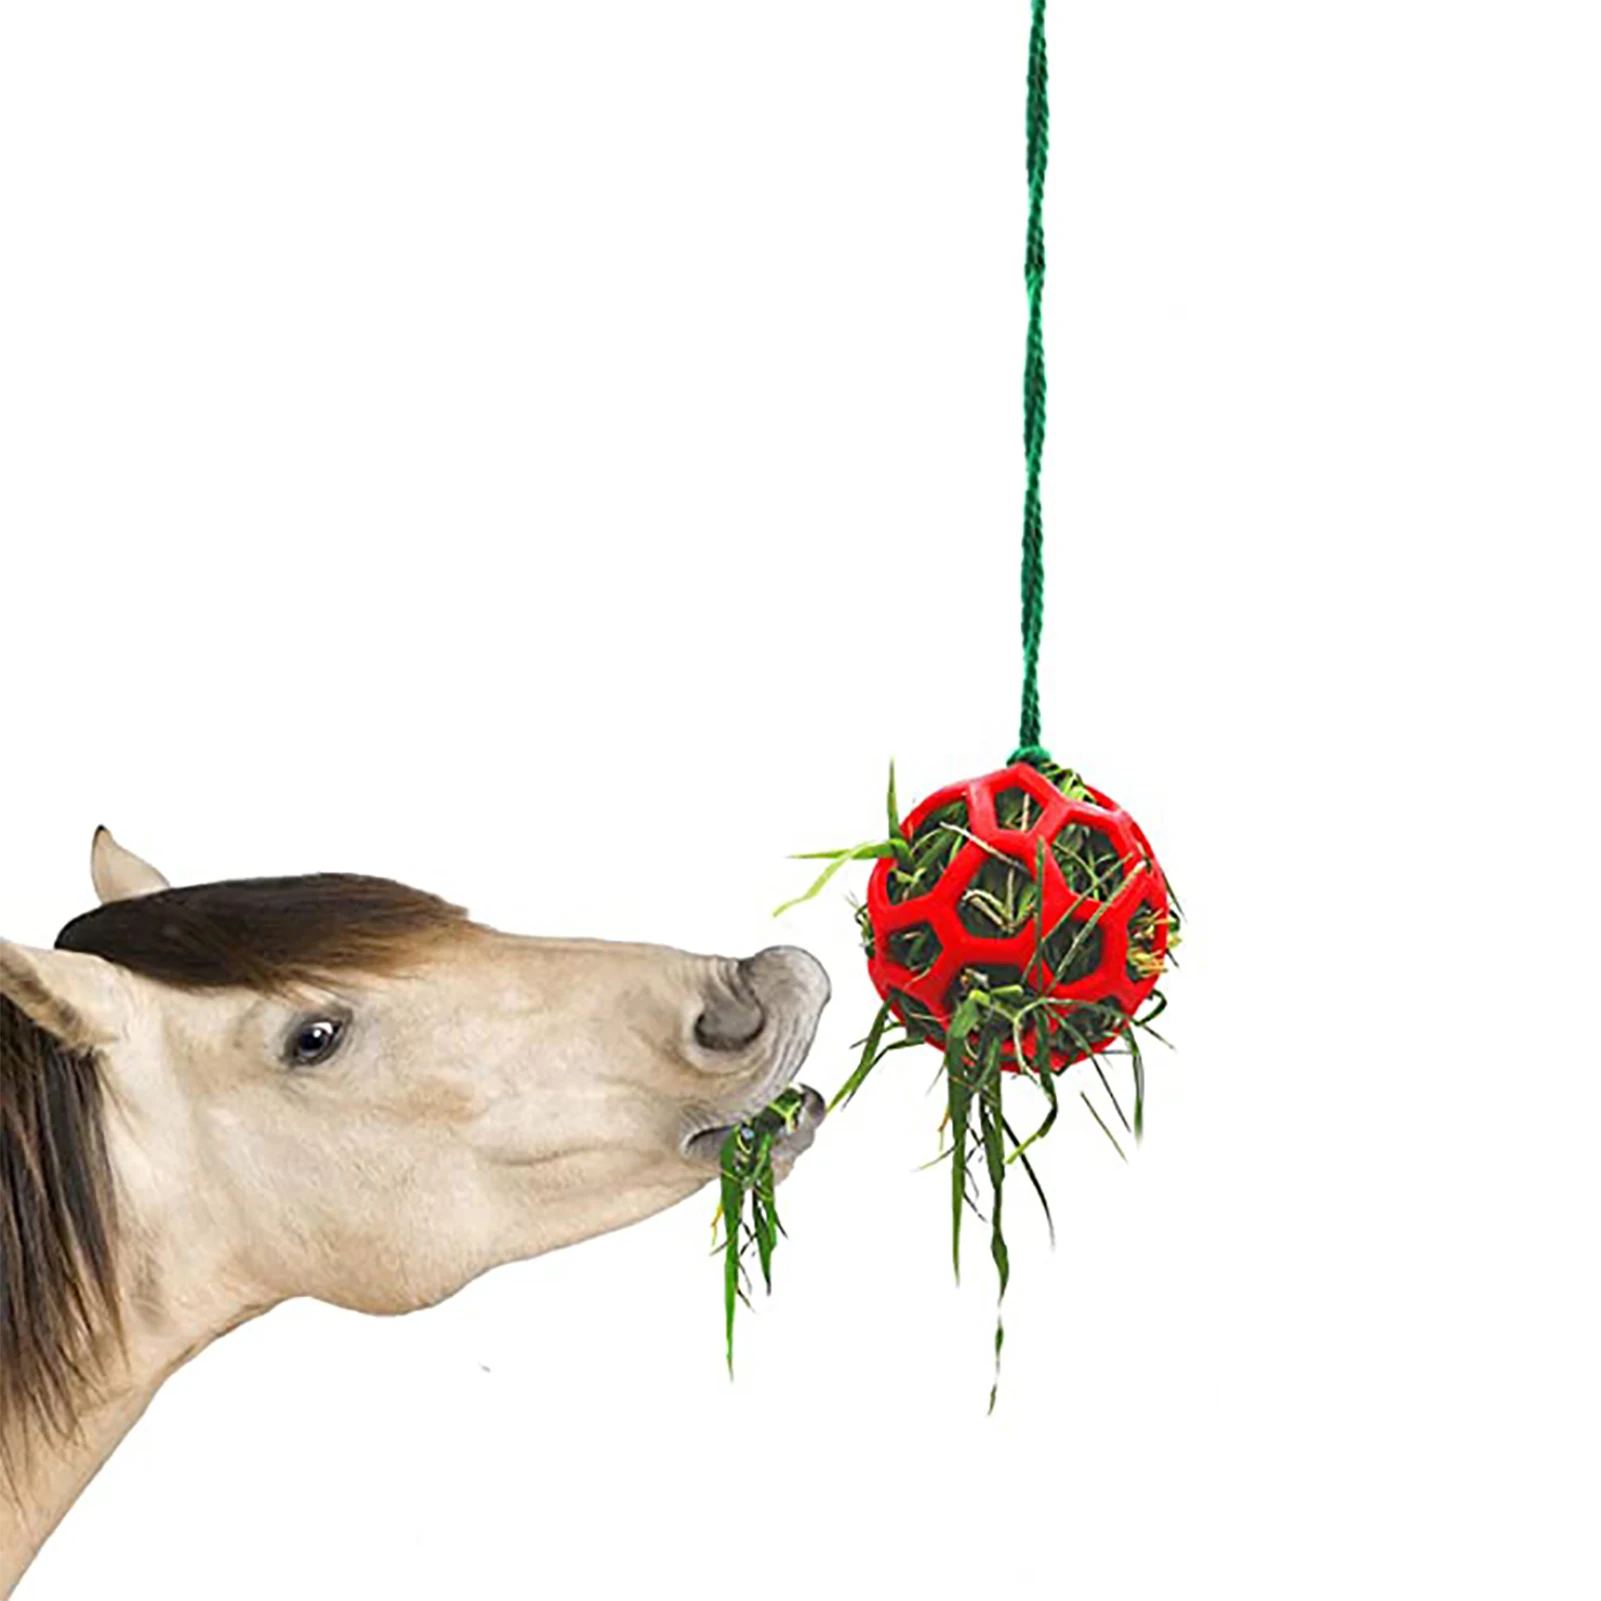 Horse Stress Release Stable Paddock Rest Area 2pcs Horse hay Carrot Feeder Toys Goat Sheep Hanging Feeding Stress Relieving Toys Blue 